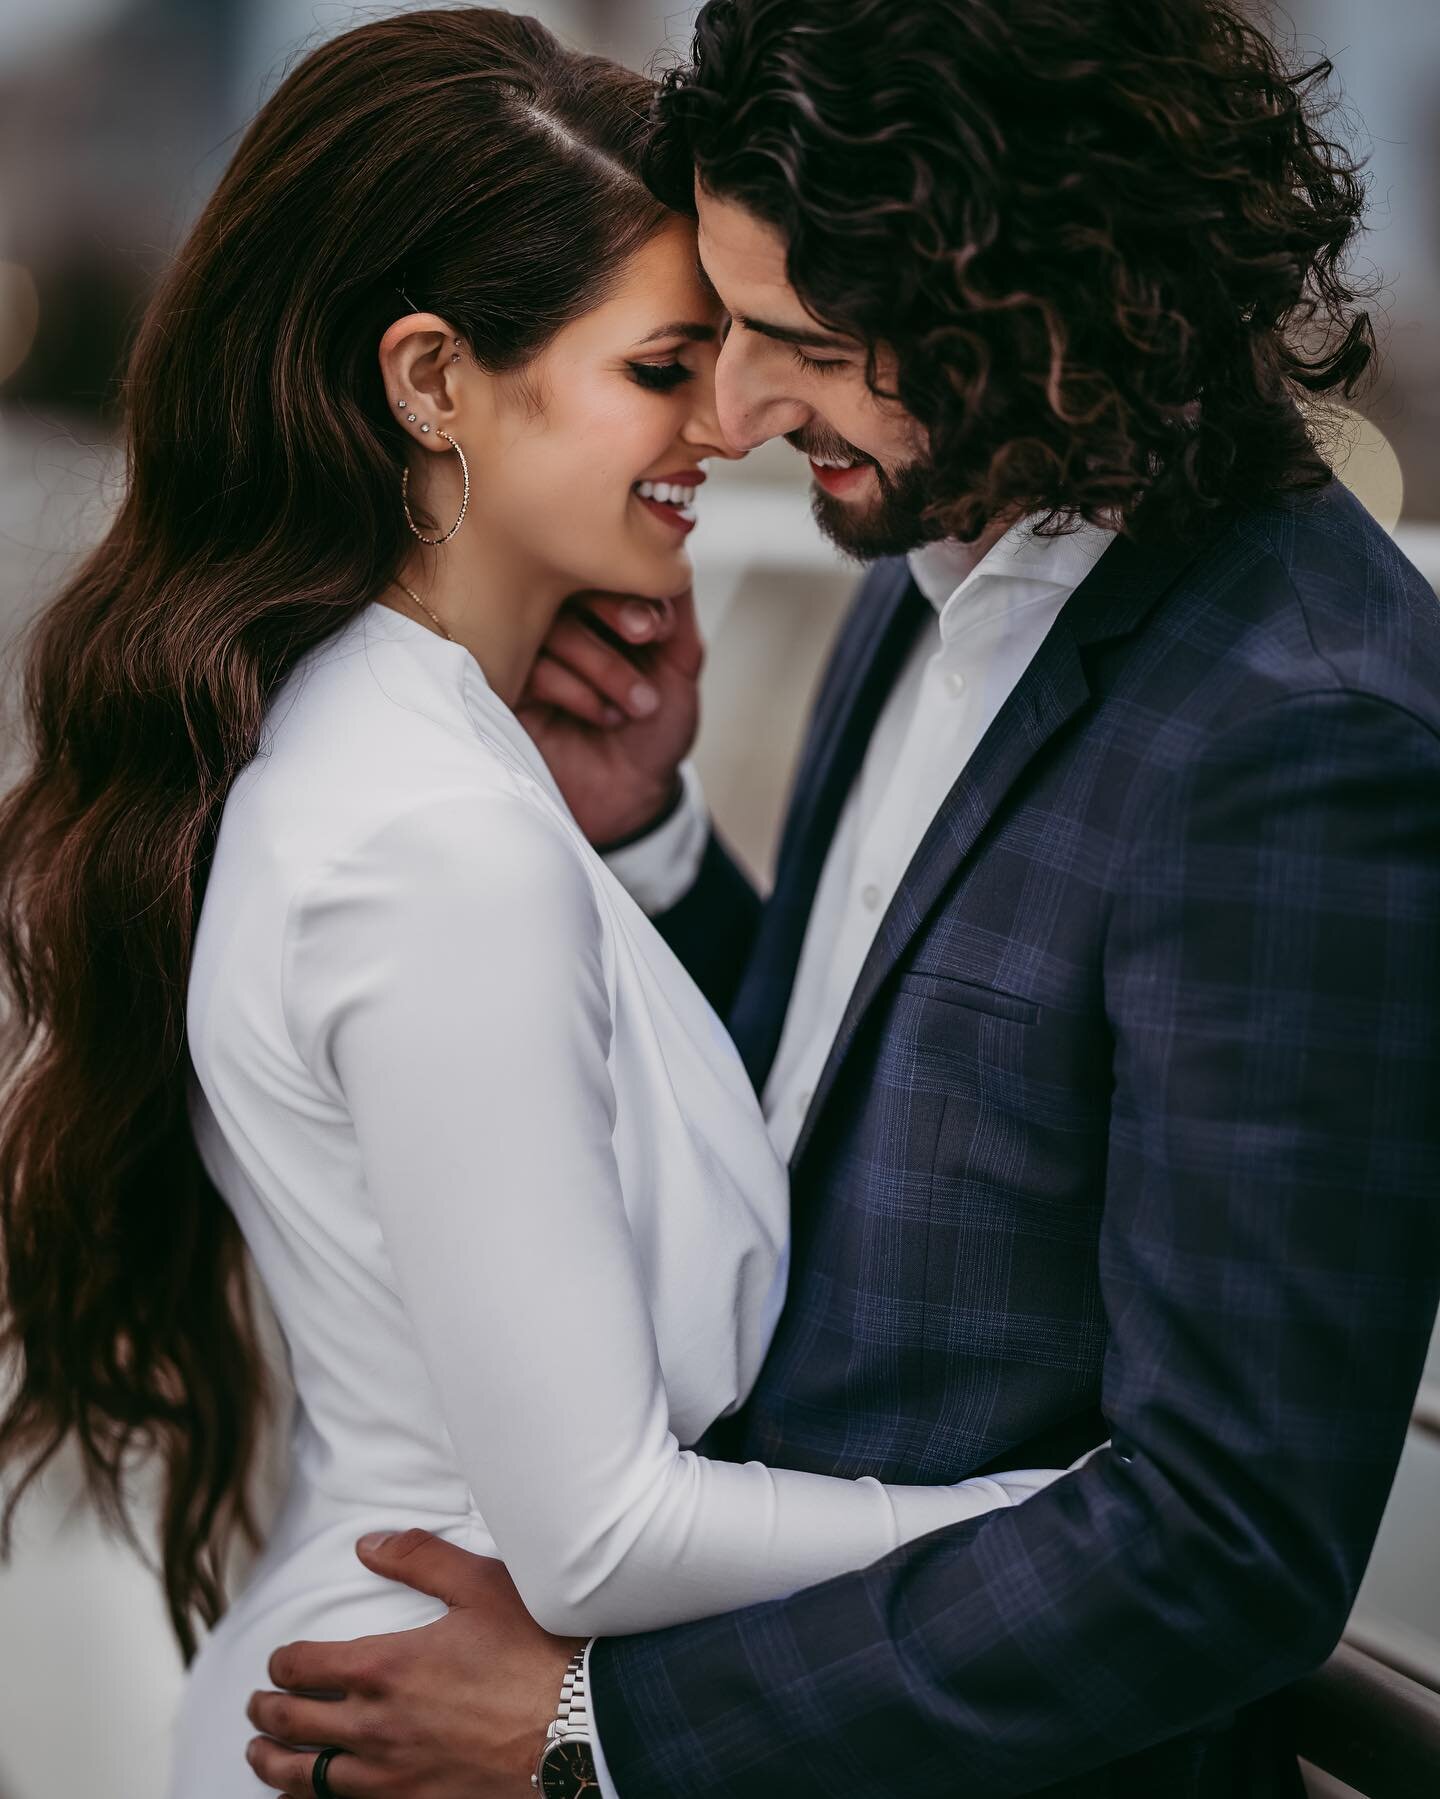 I loved everything about this engagement session, but most of all, I loved the way they loved each other and how those smiles never left their faces 🤍

Hair / @lynsaqqabeautyacademy @vanityboxbeautysalon 
Makeup / @makeupjamila 

@mimihattum